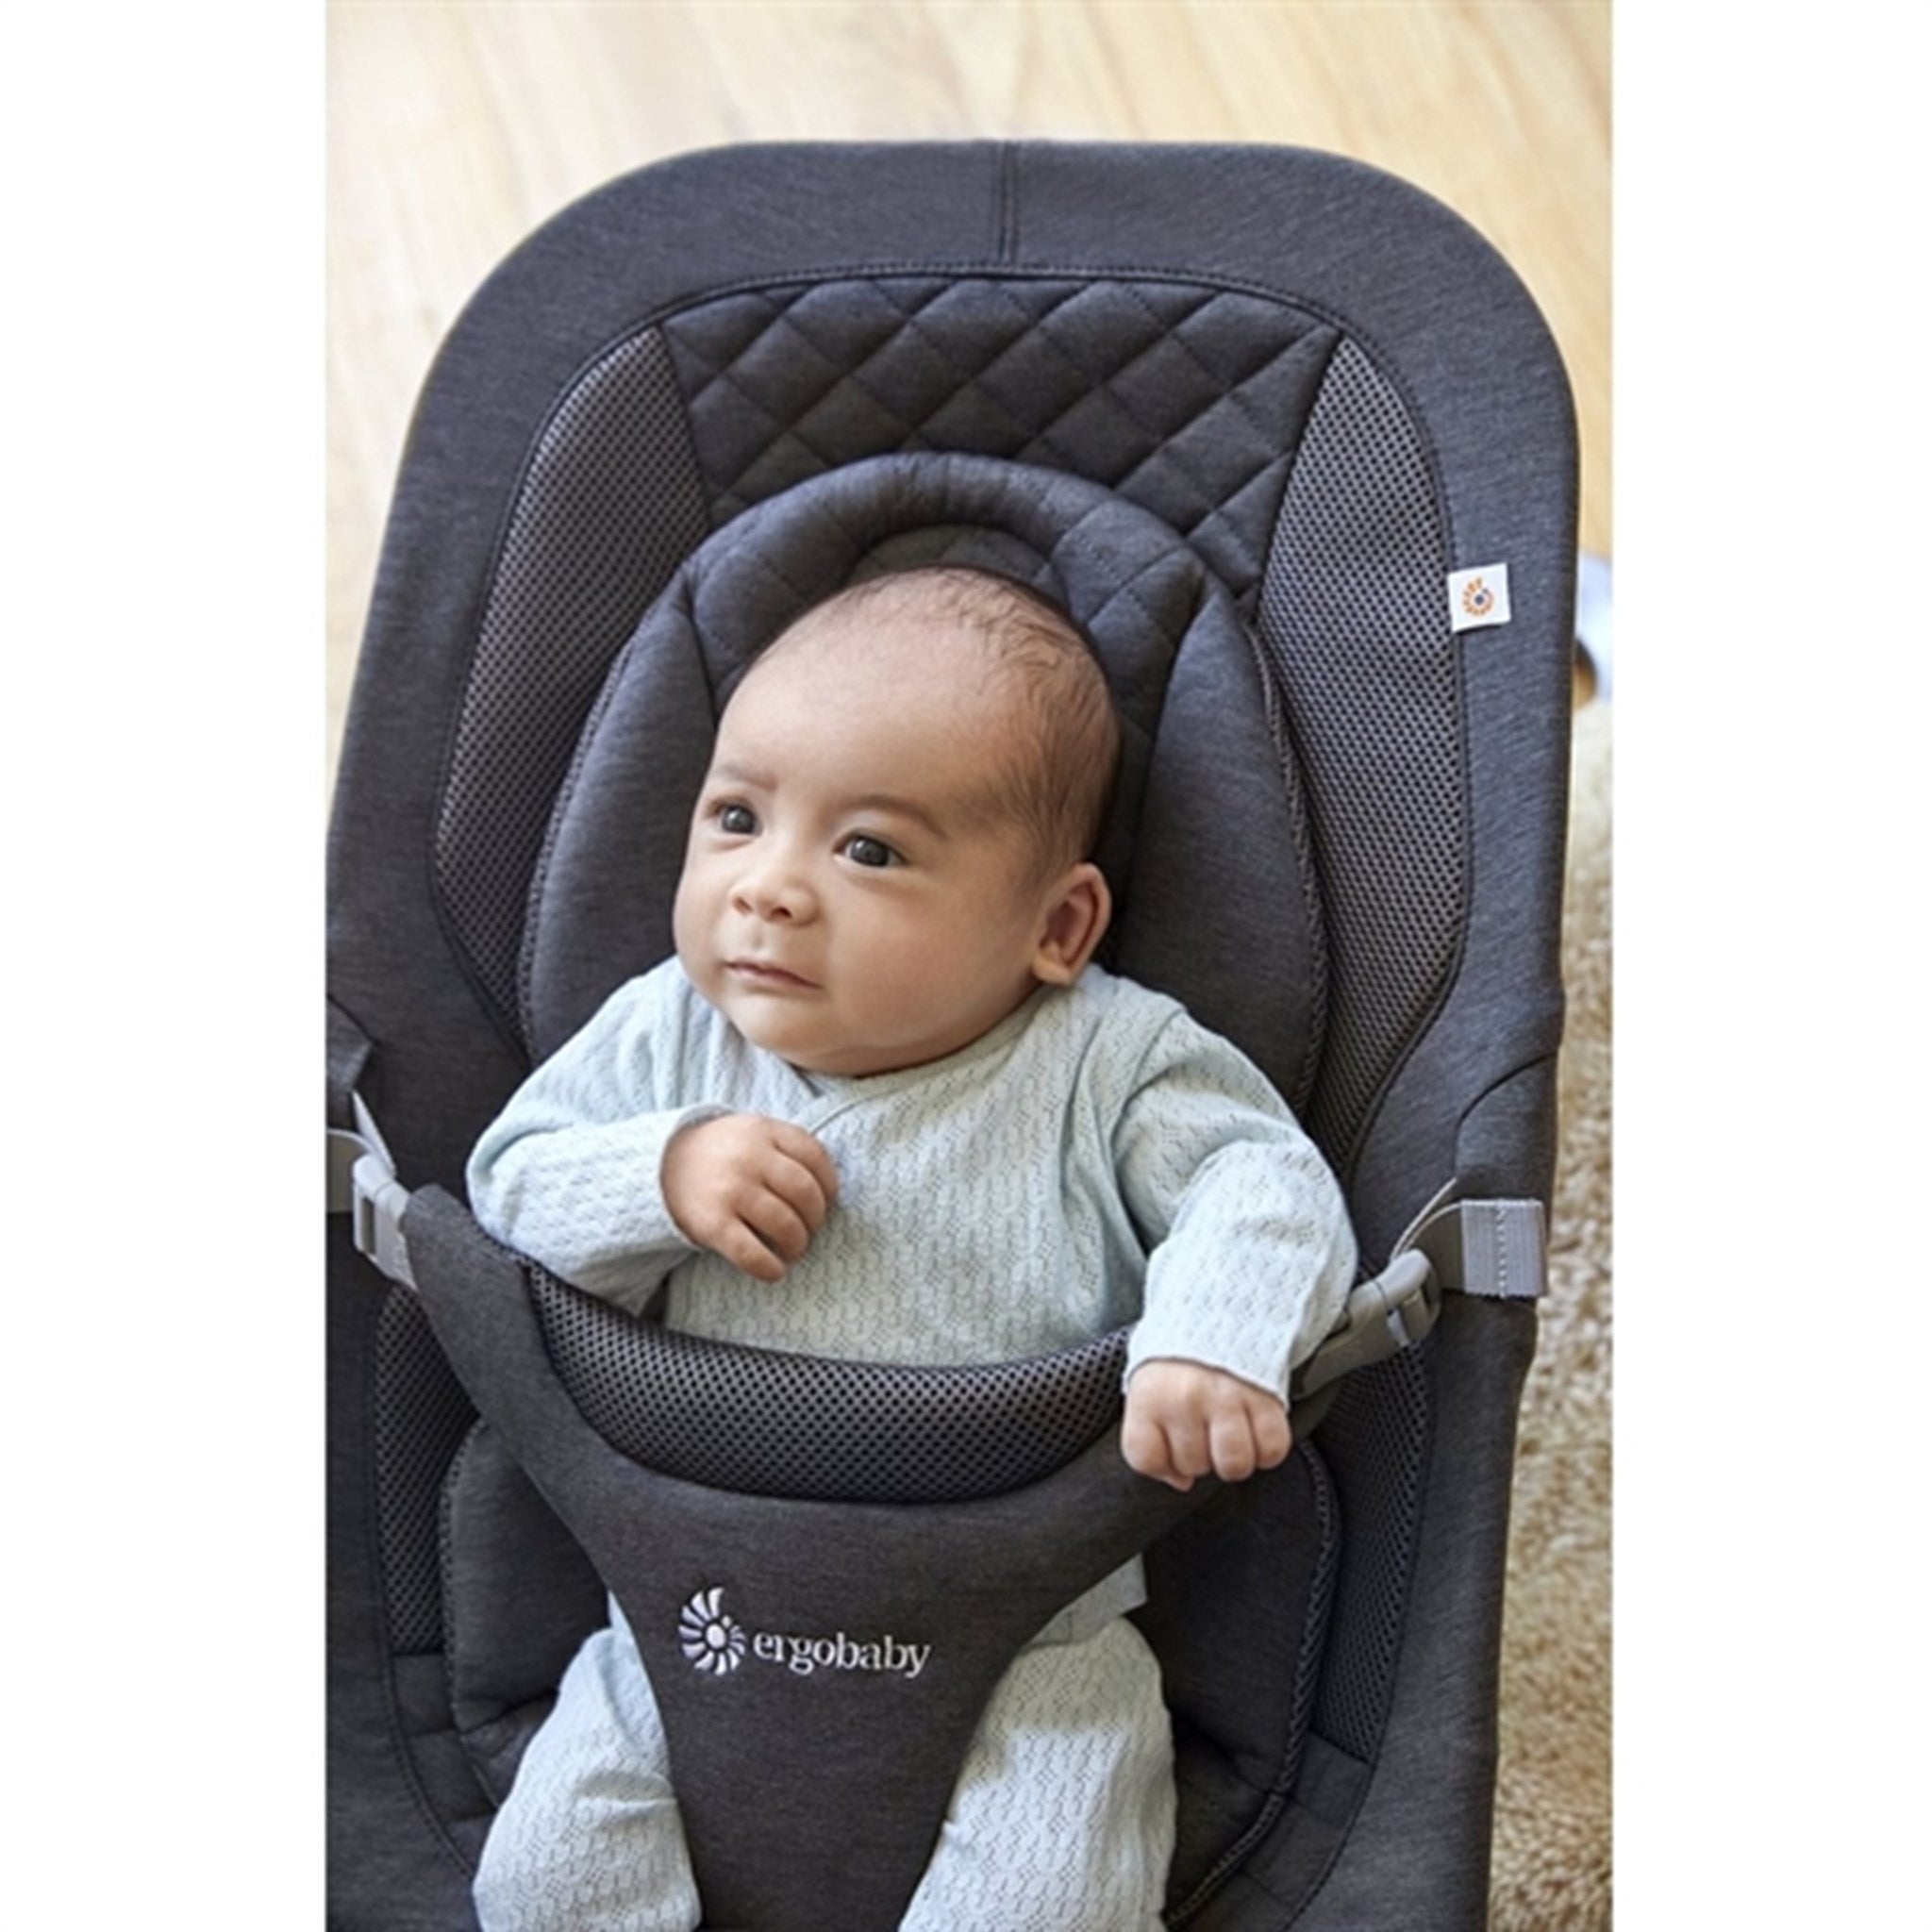 Ergobaby Evolve 3-in-1 Bouncer Charcoal Grey 4